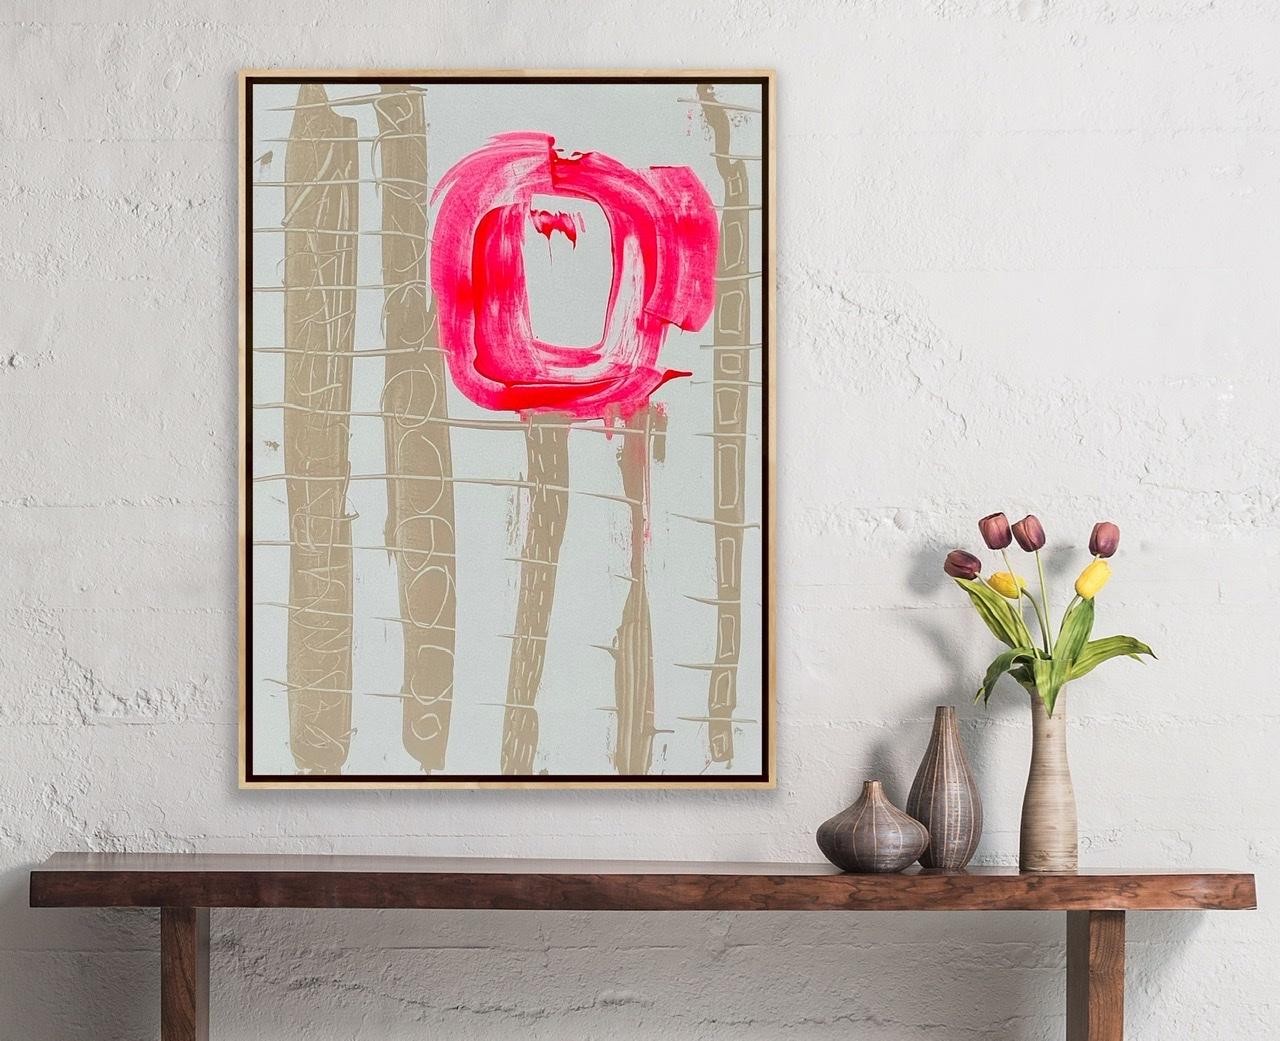 The artist is experimenting with controlled strokes and intentional composition. Her success is found in this piece's subdued monochromatic tonal background with bold pop of color. Surely to be the fan favorite focal point of any space.